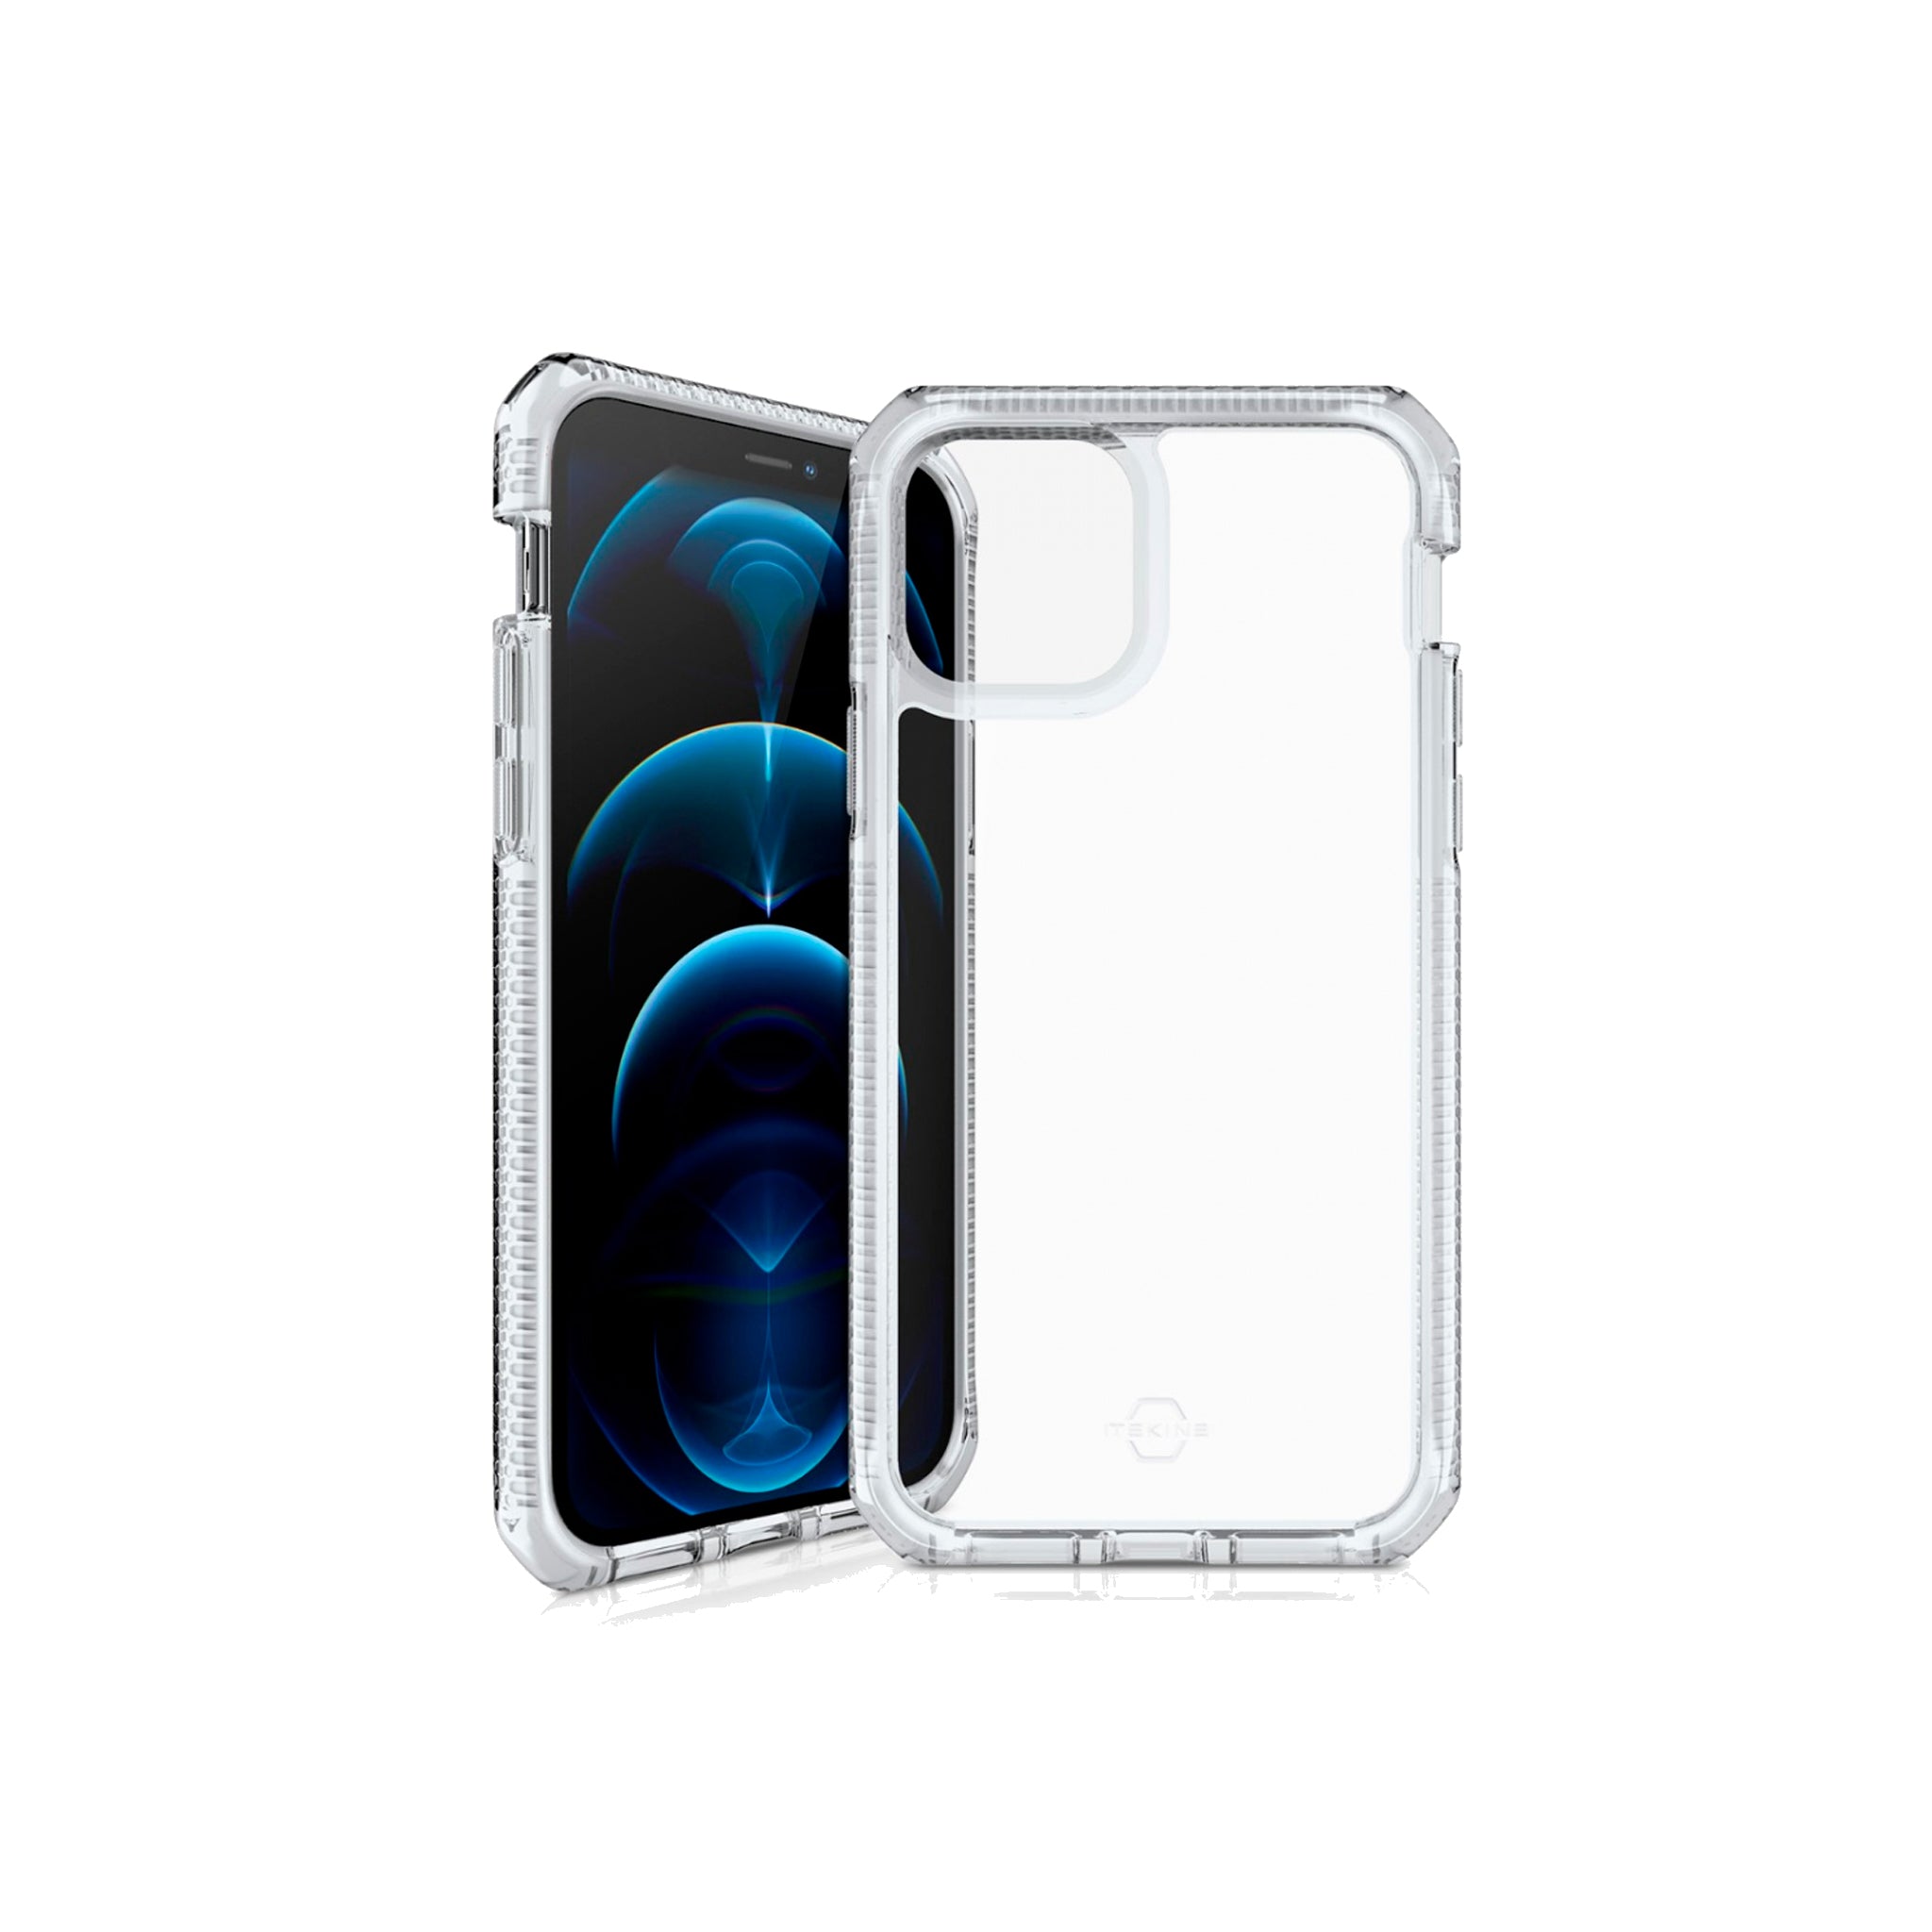 Itskins - Supreme Clear Case For Apple Iphone 12 Pro Max - White And Transparent